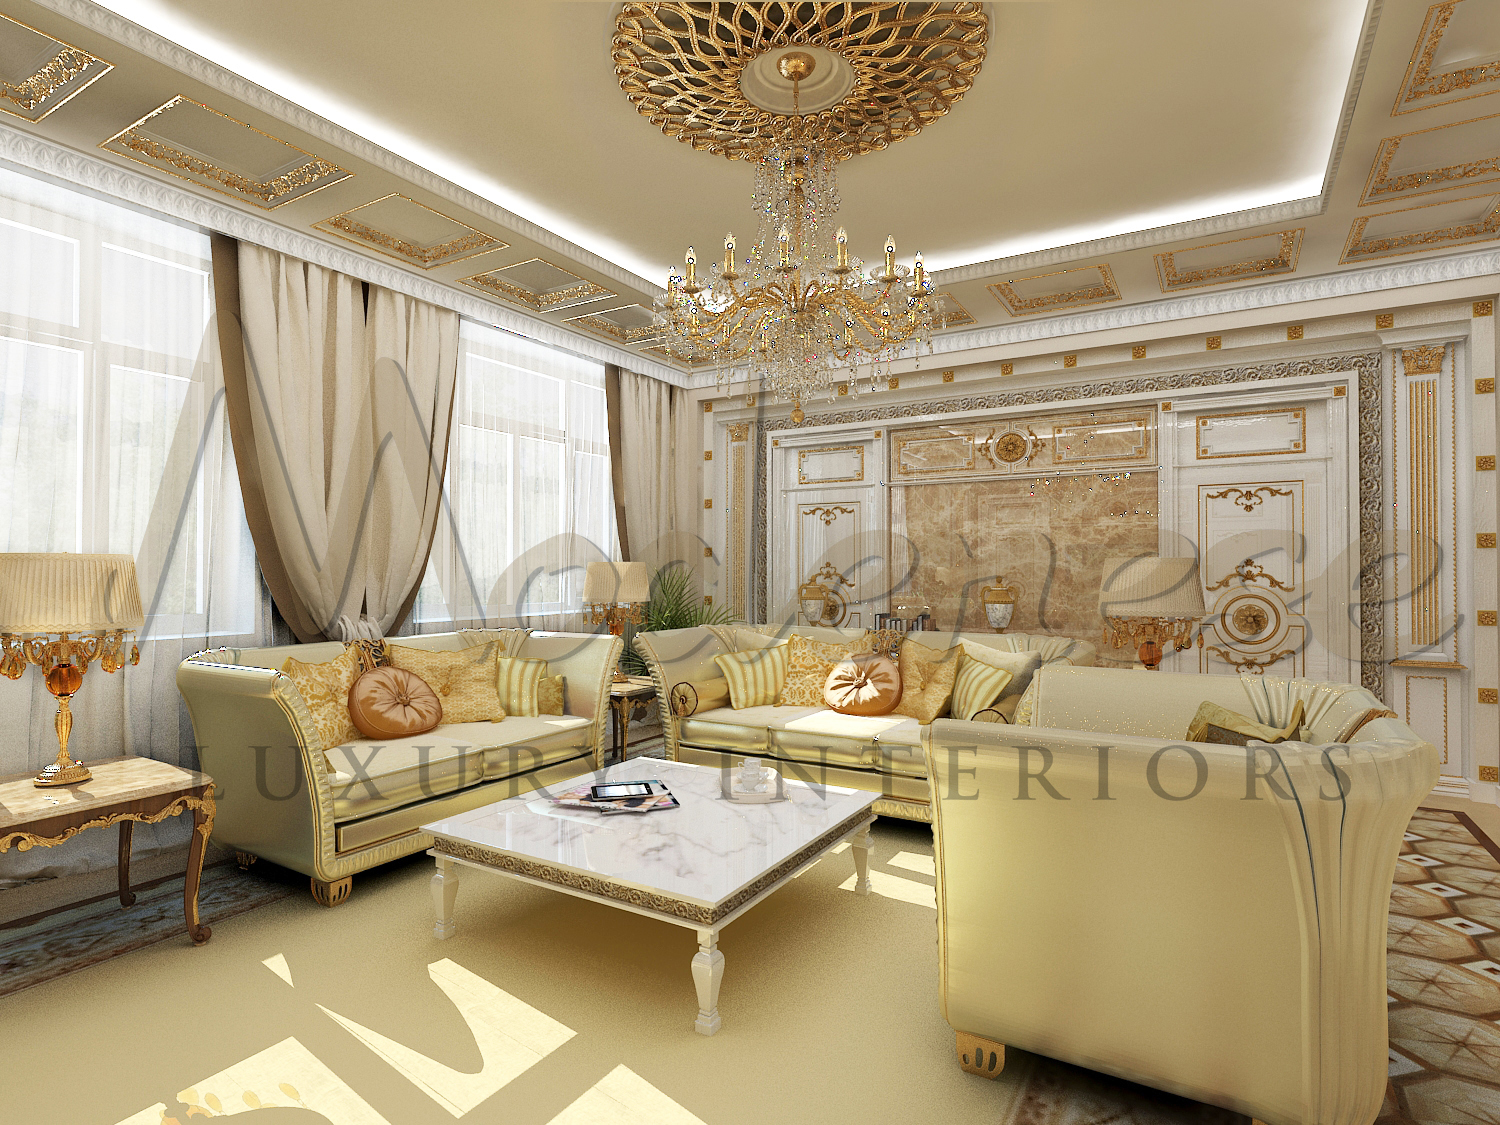 Tailor-made living room design for private residence. Luxury Style Villa Design Pakistan. Unique hand-made furniture made in Italy. Sophisticated refined living room furniture.